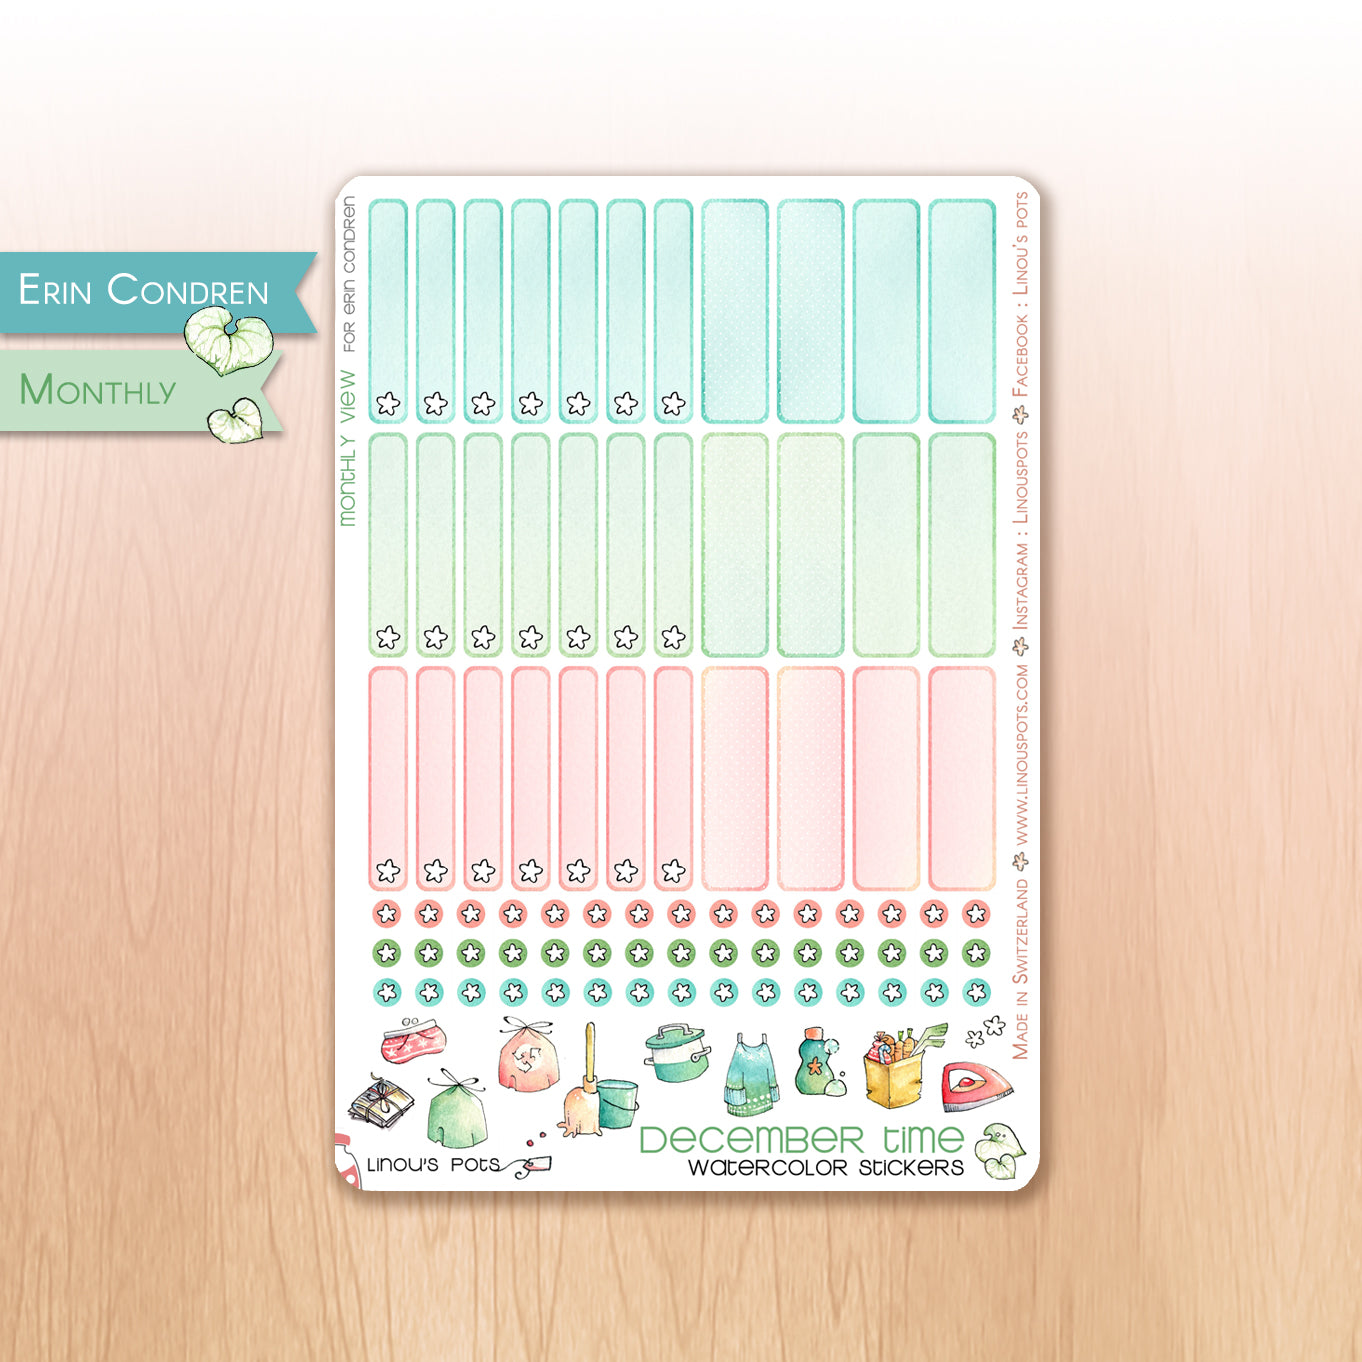 Monthly watercolor planner stickers in Christmas colors